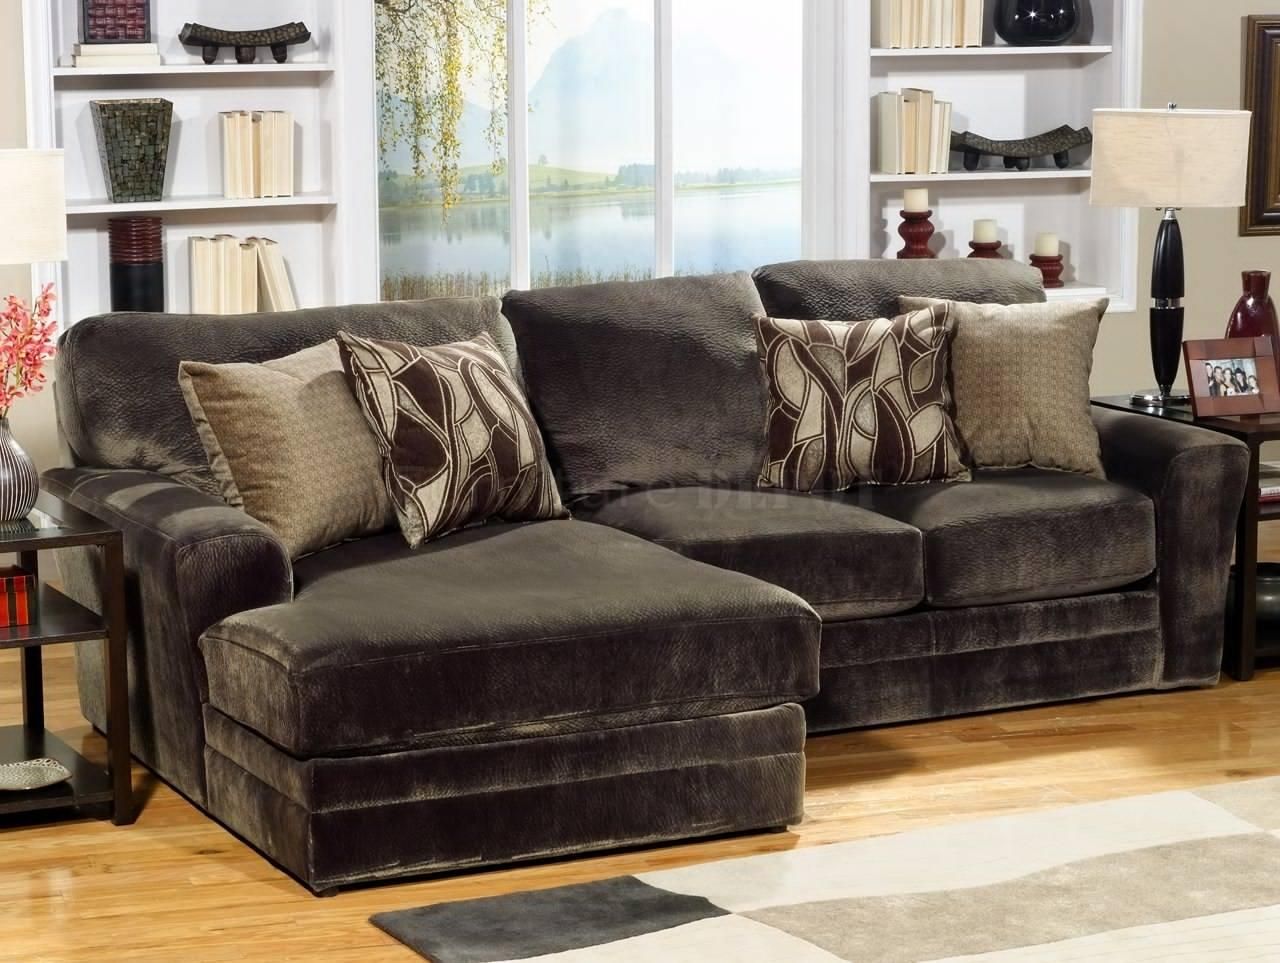 Chenille Sectional Sofa – Sofa Idea With Chenille Sectional Sofas (View 1 of 20)